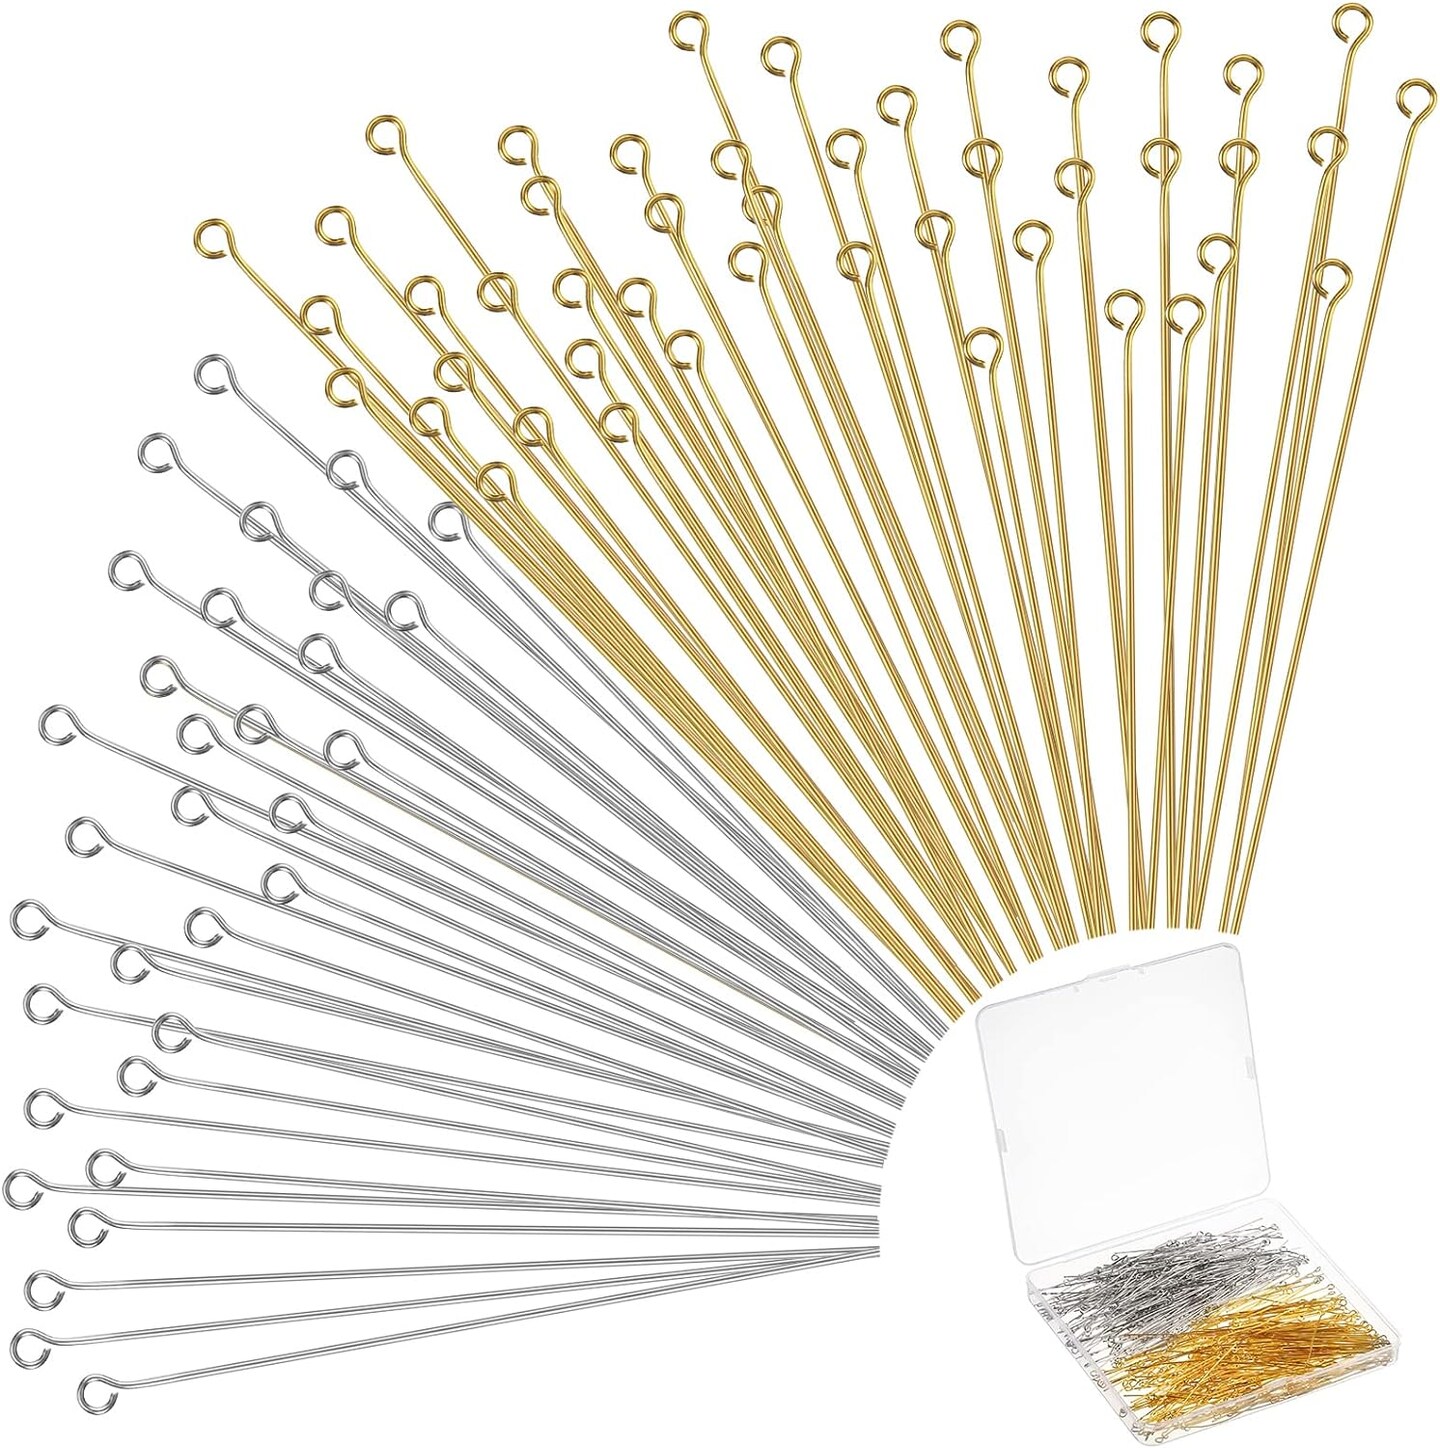 500 Pieces Eye Pins 50 mm Jewelry Making Pin Heads Eye Jewelry Head Pins for Jewelry Making DIY Ball Head Pins for Craft Earring Bracelet Jewelry Making Accessories Supplies (Gold, Silver)